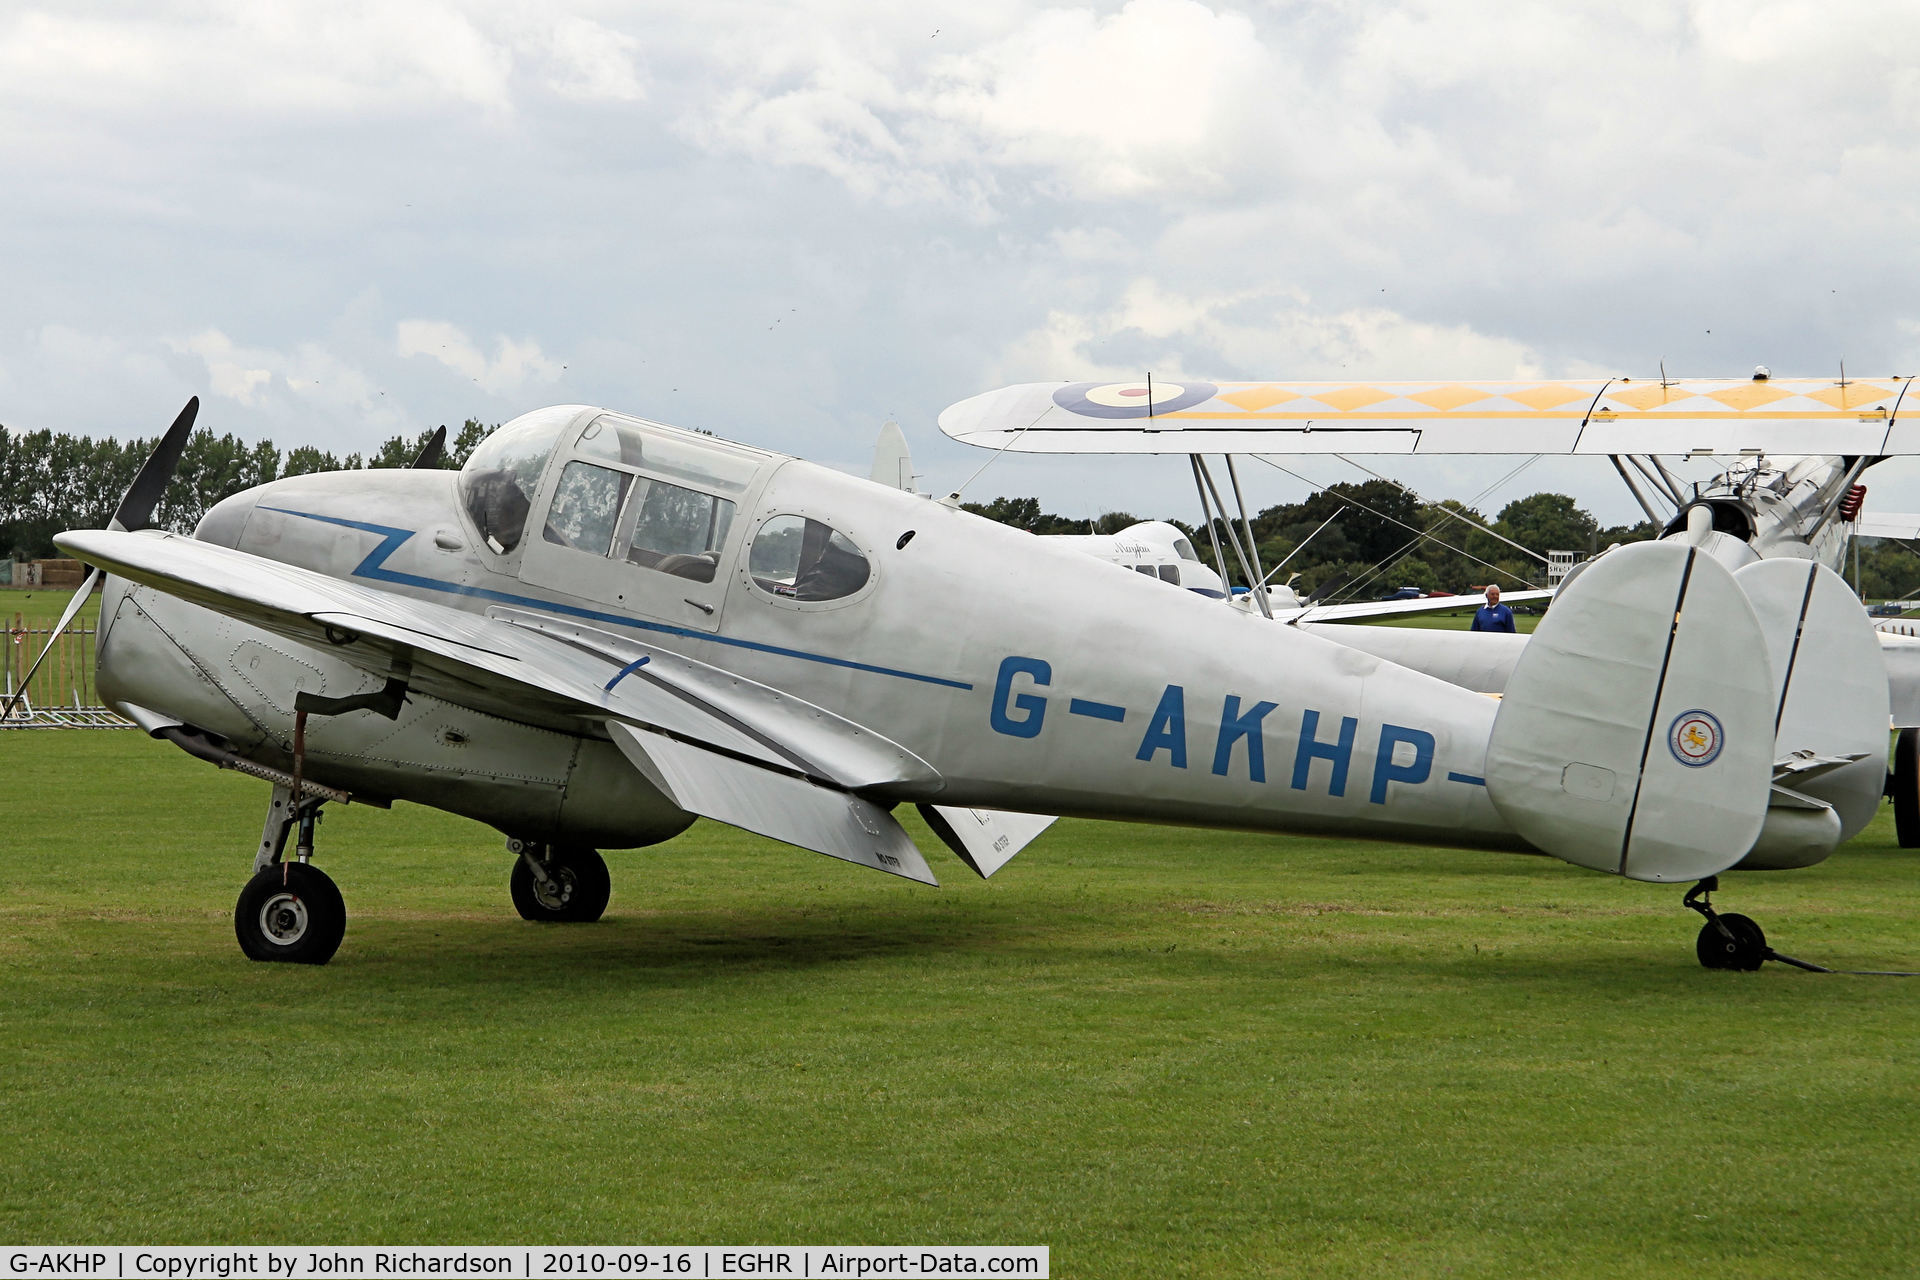 G-AKHP, 1947 Miles M65 Gemini 1A C/N 6519, At Goodwood for the Revival Meeting